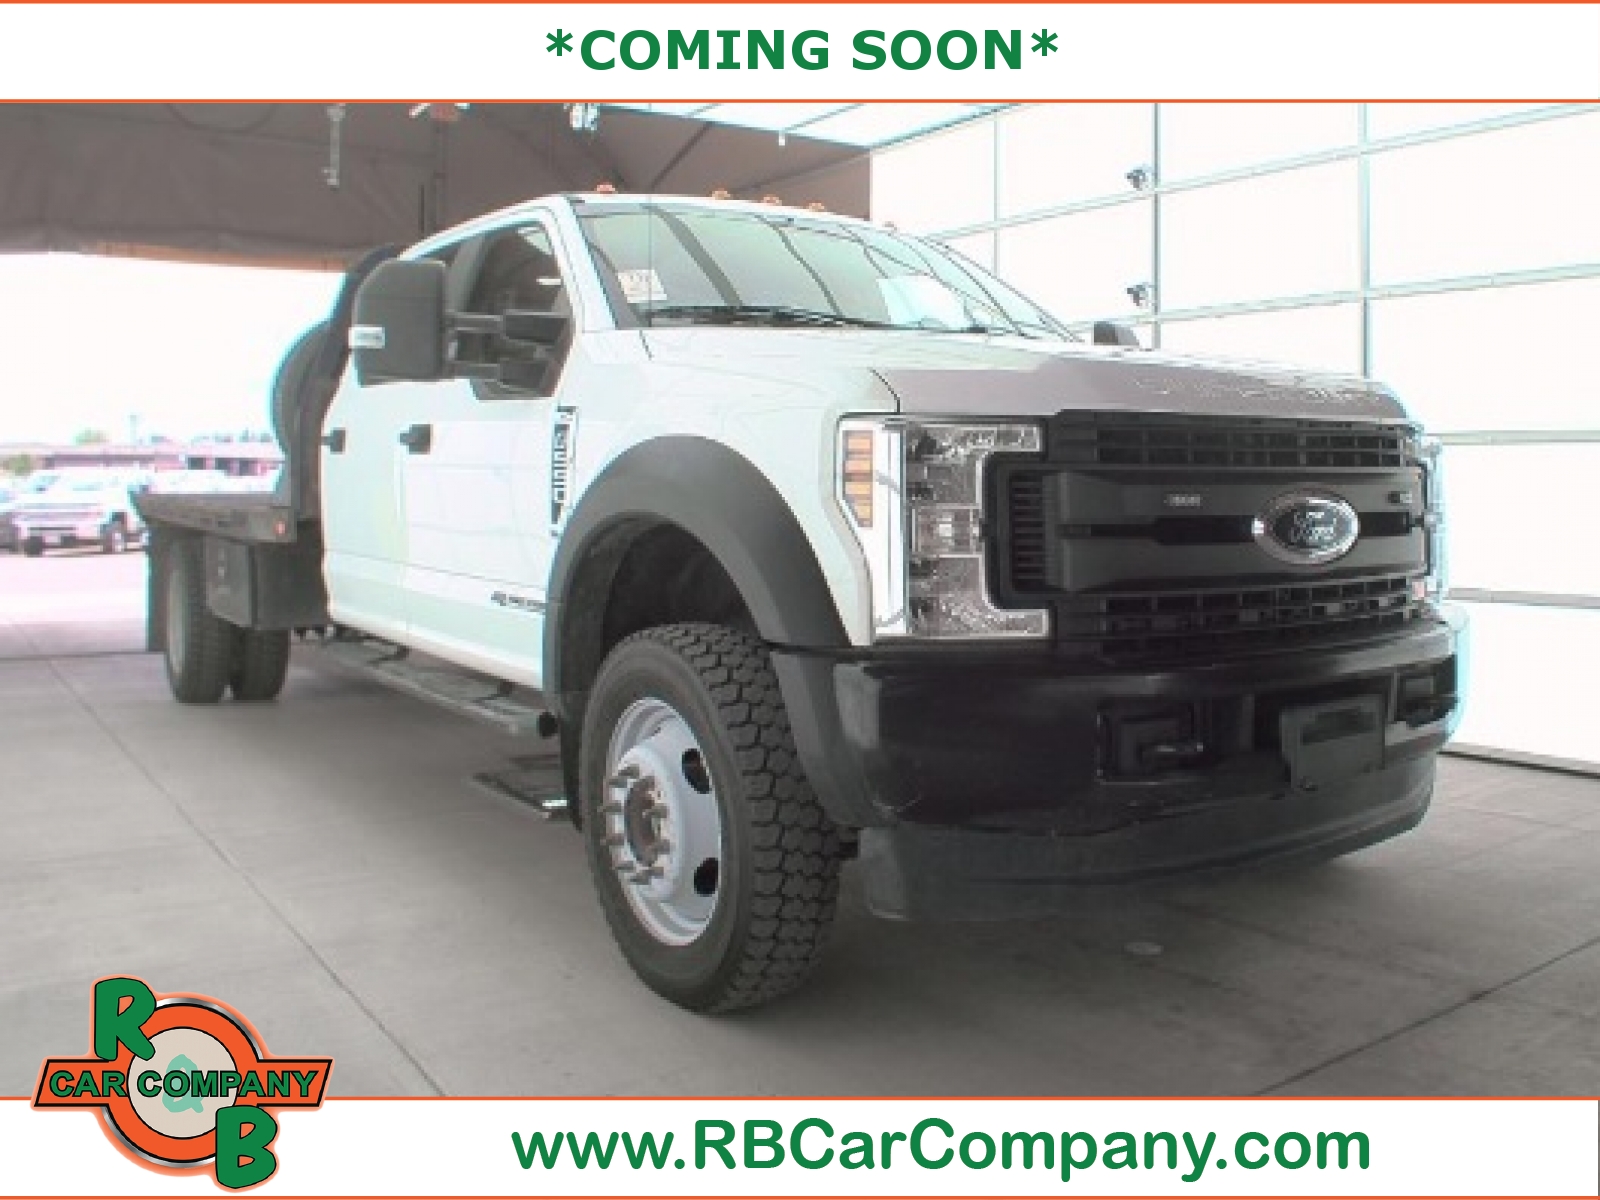 2015 Ford Super Duty F-550 DRW Chassis C XL, 36374, Photo 1